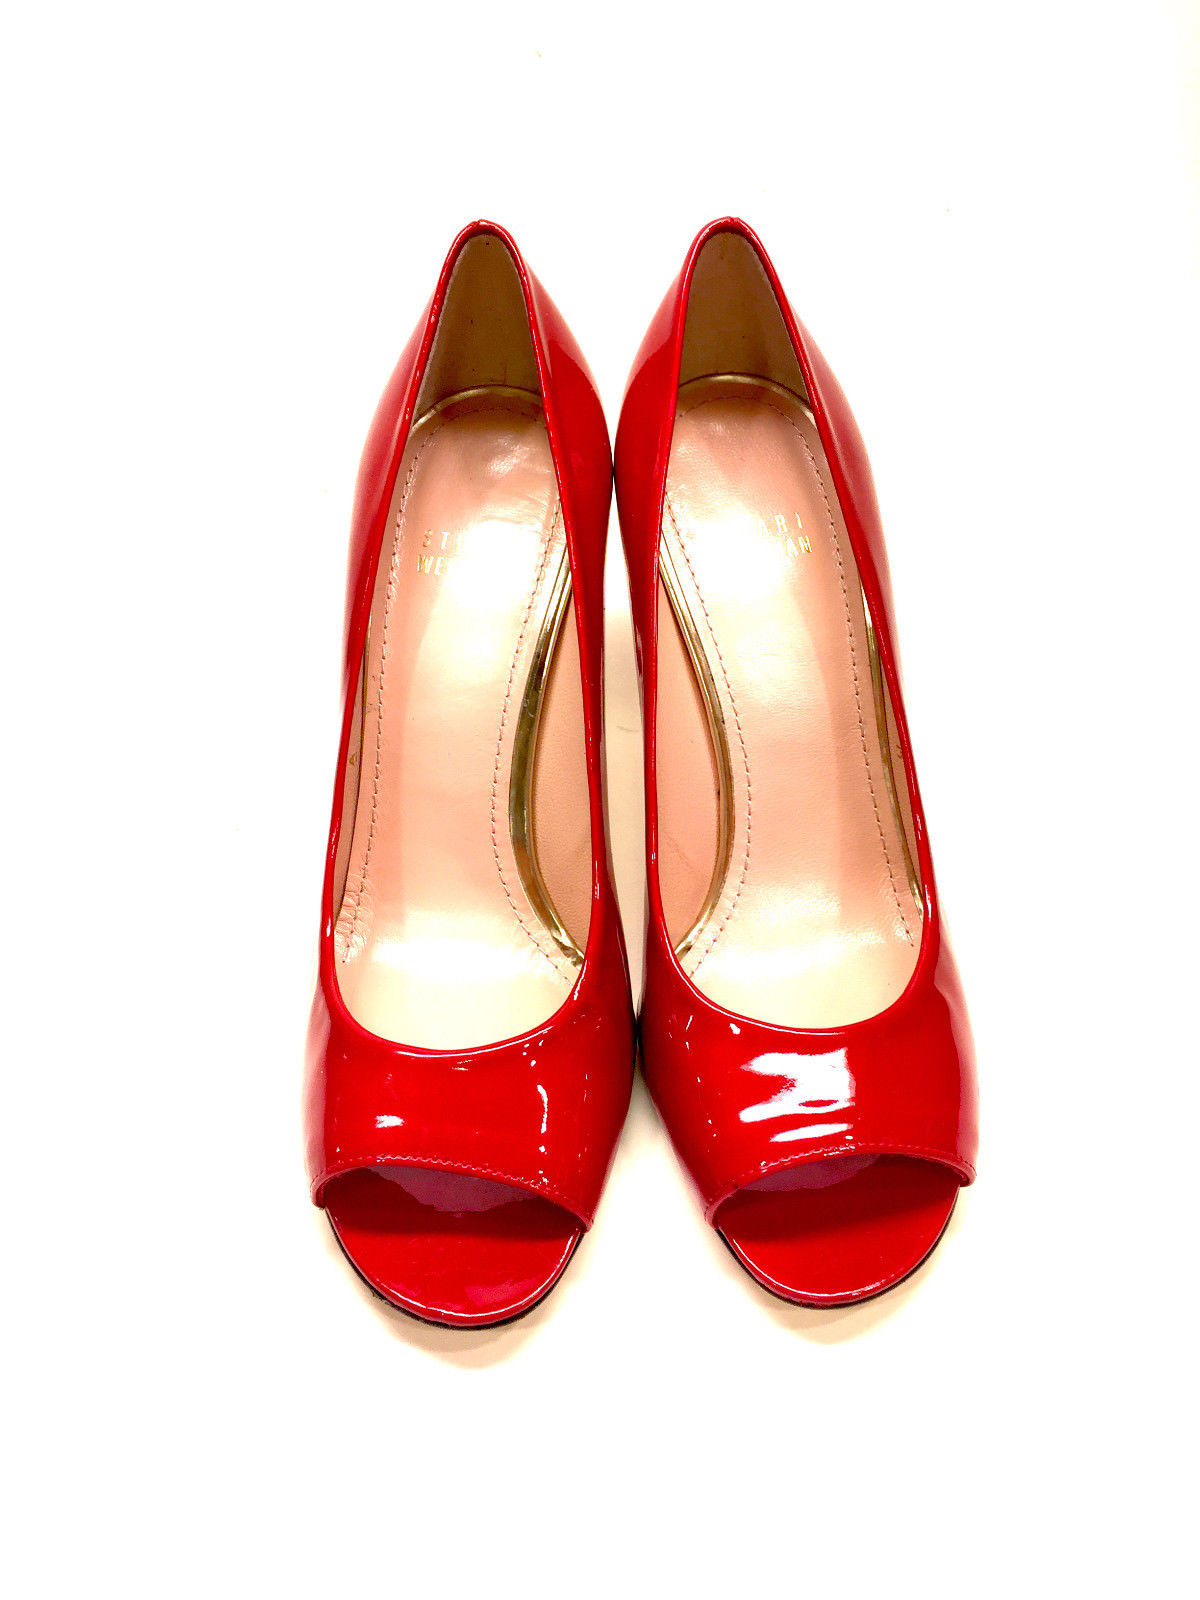 red patent shoes